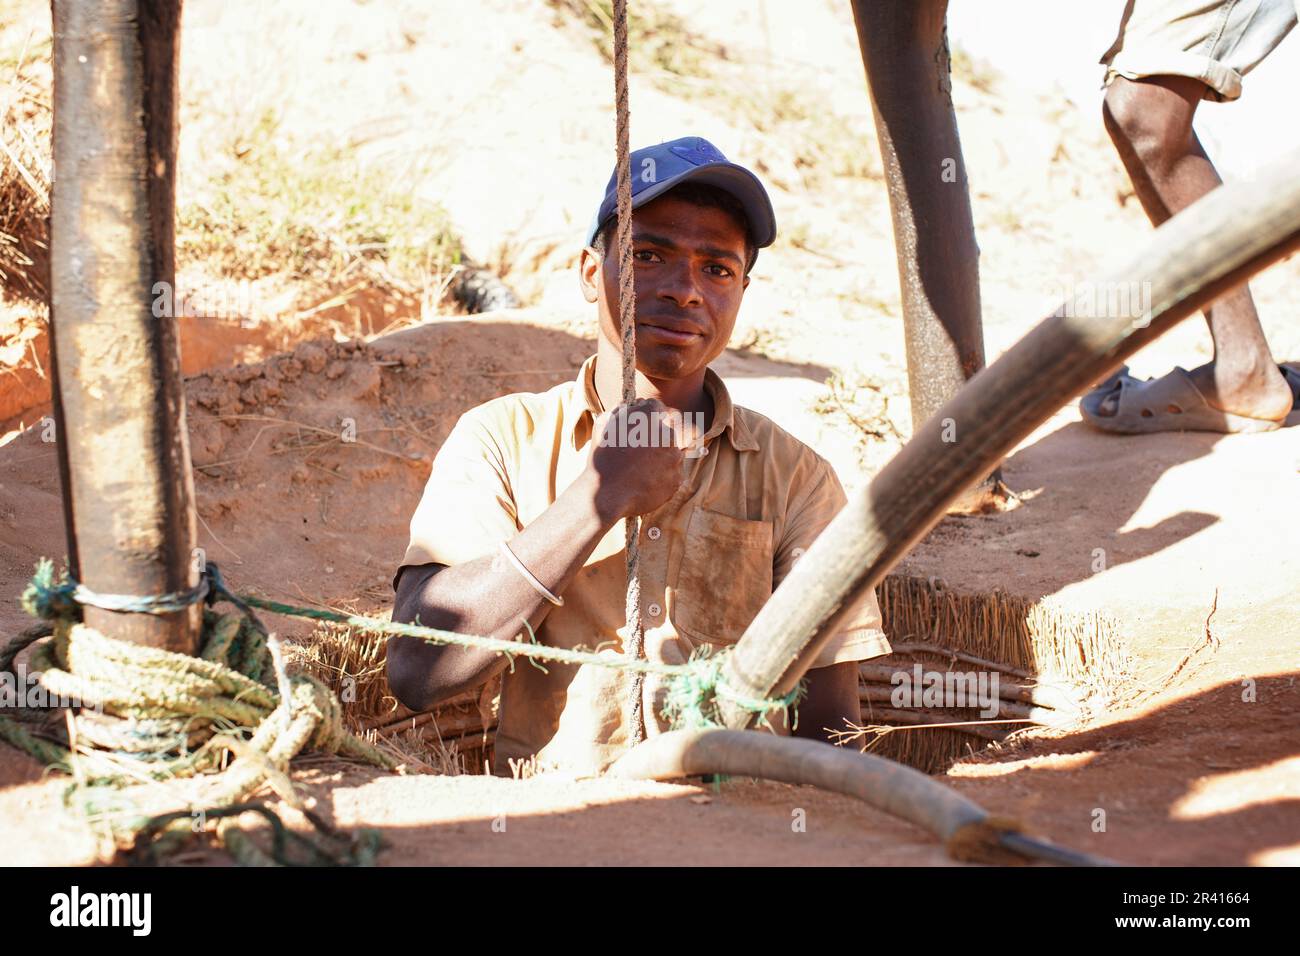 Ilakaka, Madagascar - April 30, 2019: Unknown Malagasy man standing in ground precious stone mine hole or well, half body visible, holding rope - abou Stock Photo